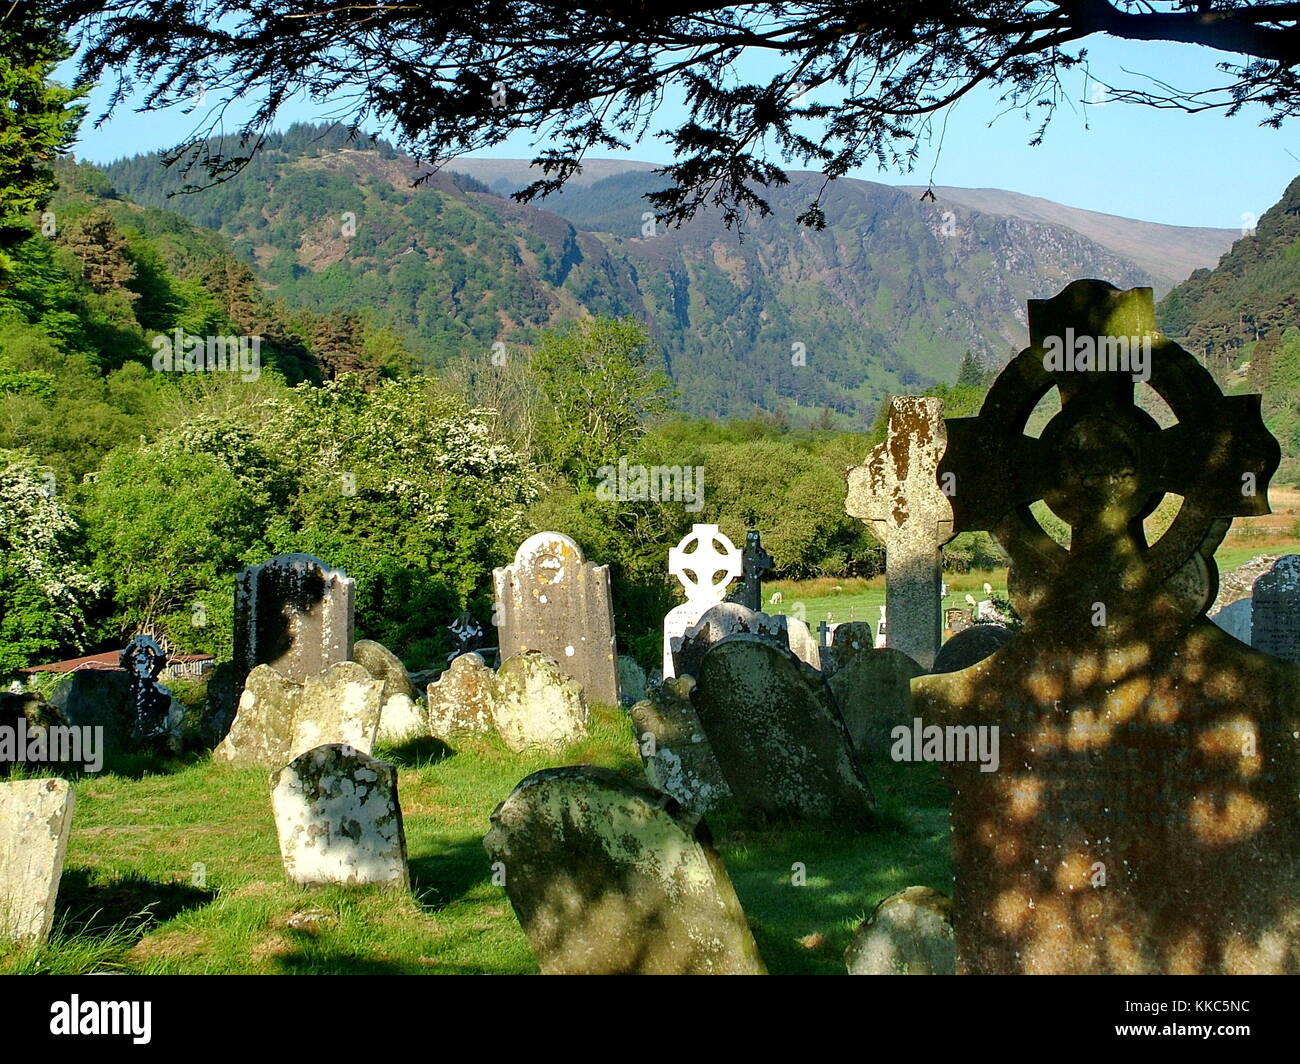 Cemetery at Glendalough Monastic Site in Wicklow Mountains National Park, Ireland. Stock Photo